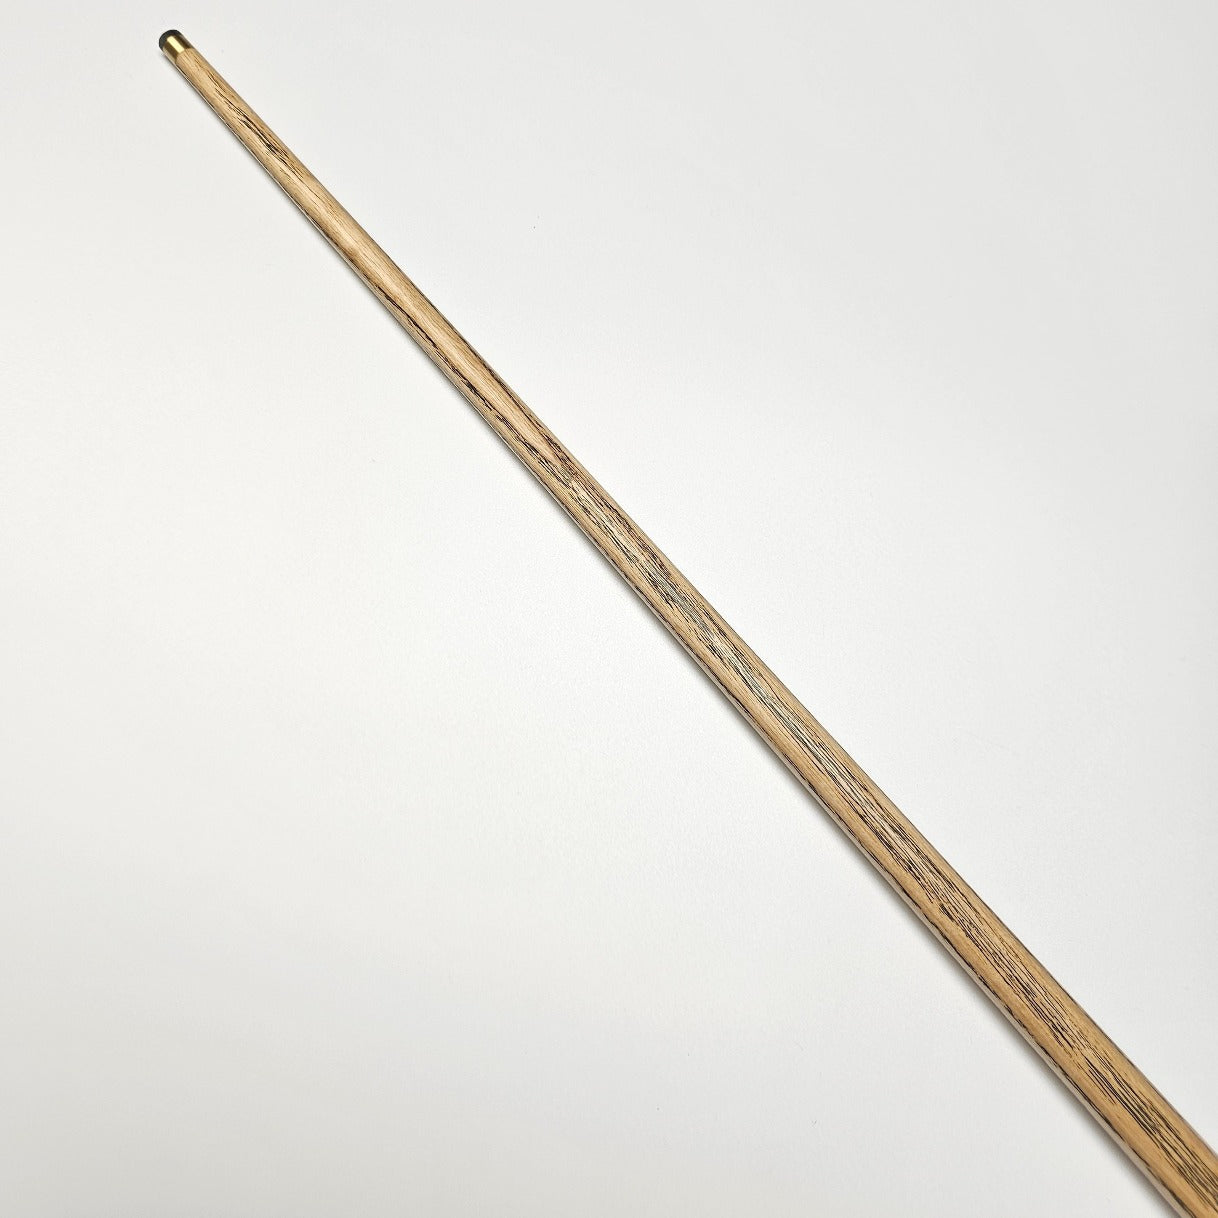 Asia Cues Support - One Piece Snooker Cue  Handmade Ebony Butt. Shaft View